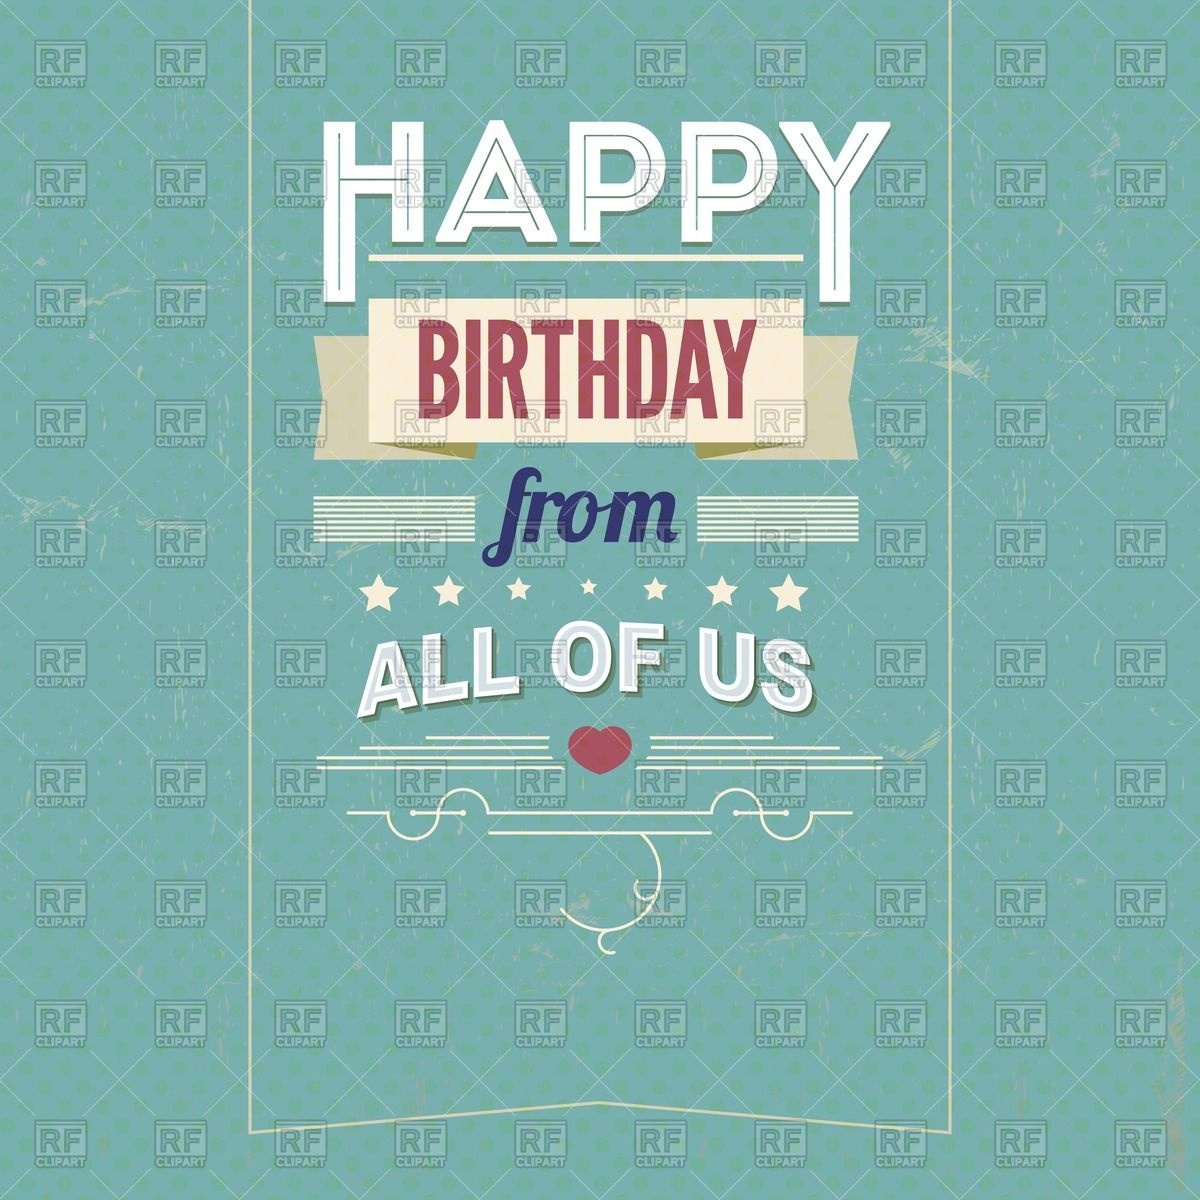 Birthday Poster In Retro Style 42178 Backgrounds Textures Abstract